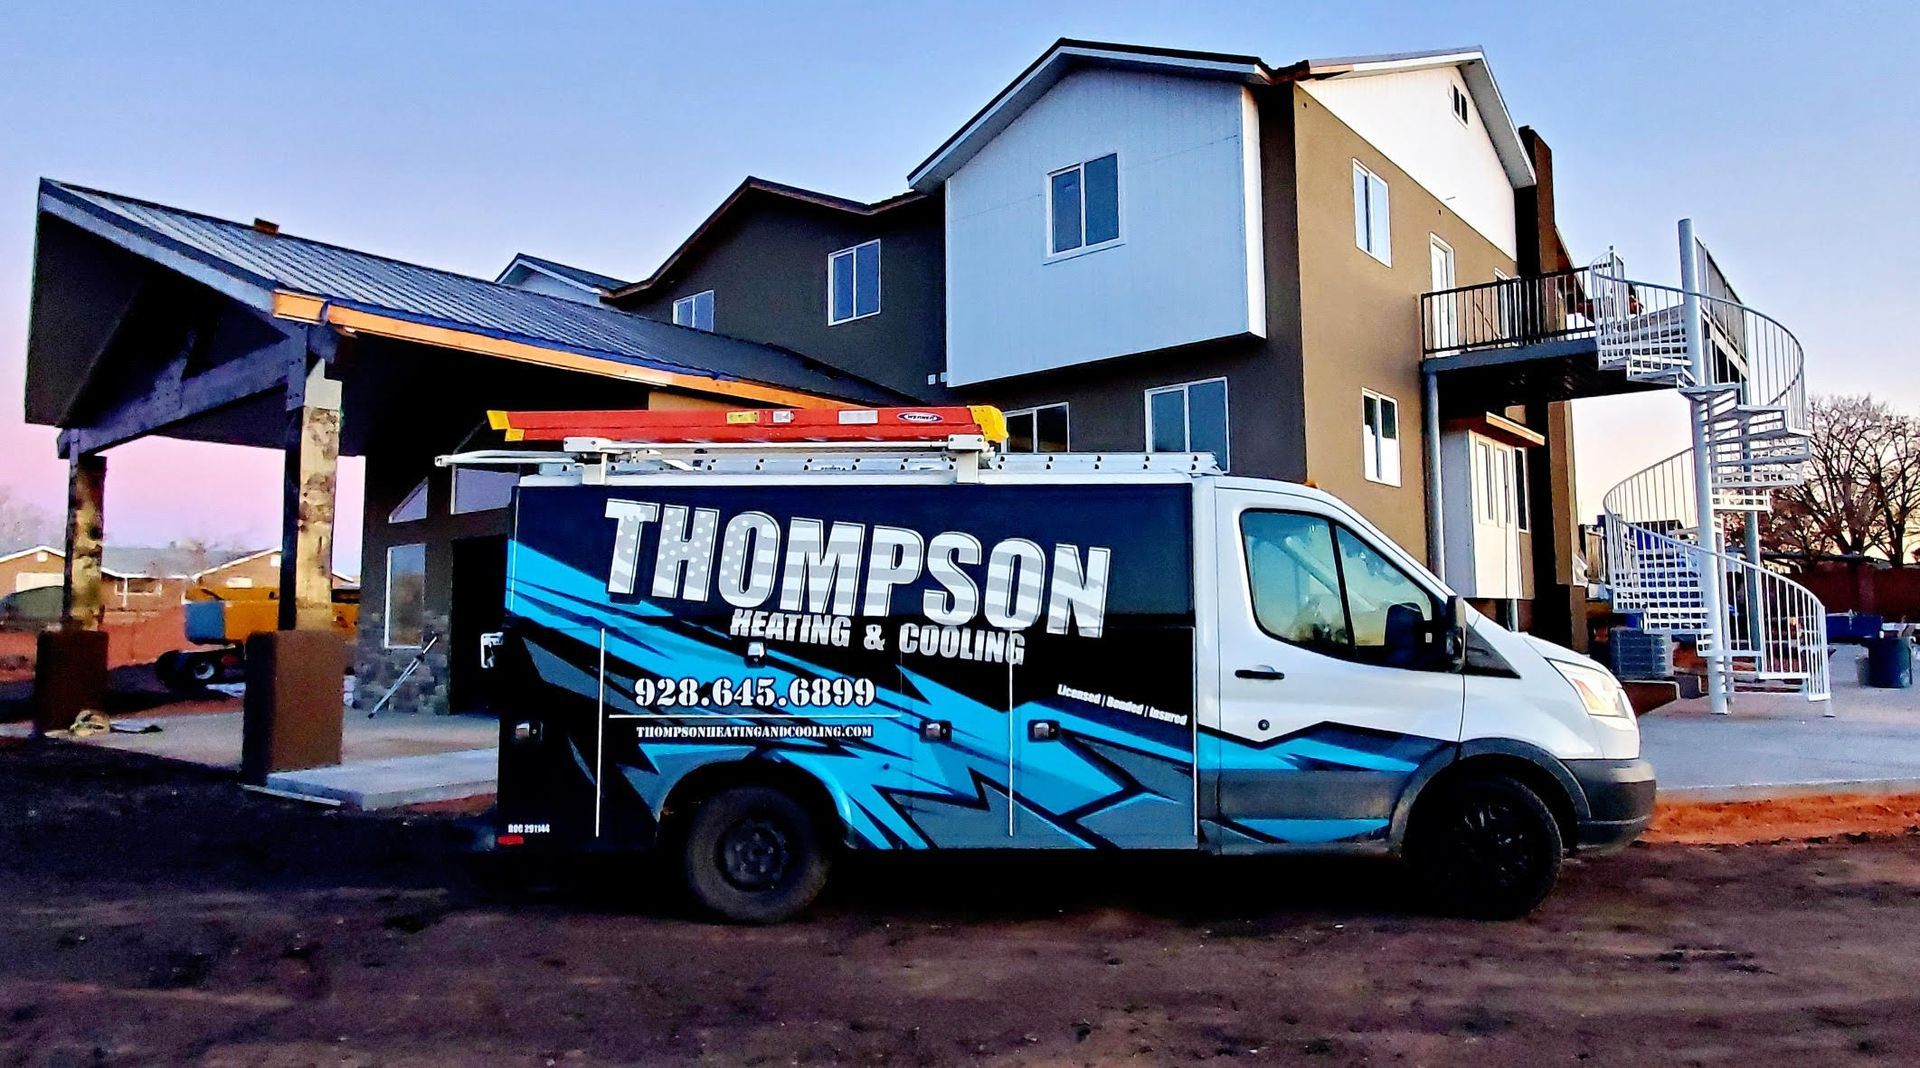 Thompson heating and cooling van outside a home